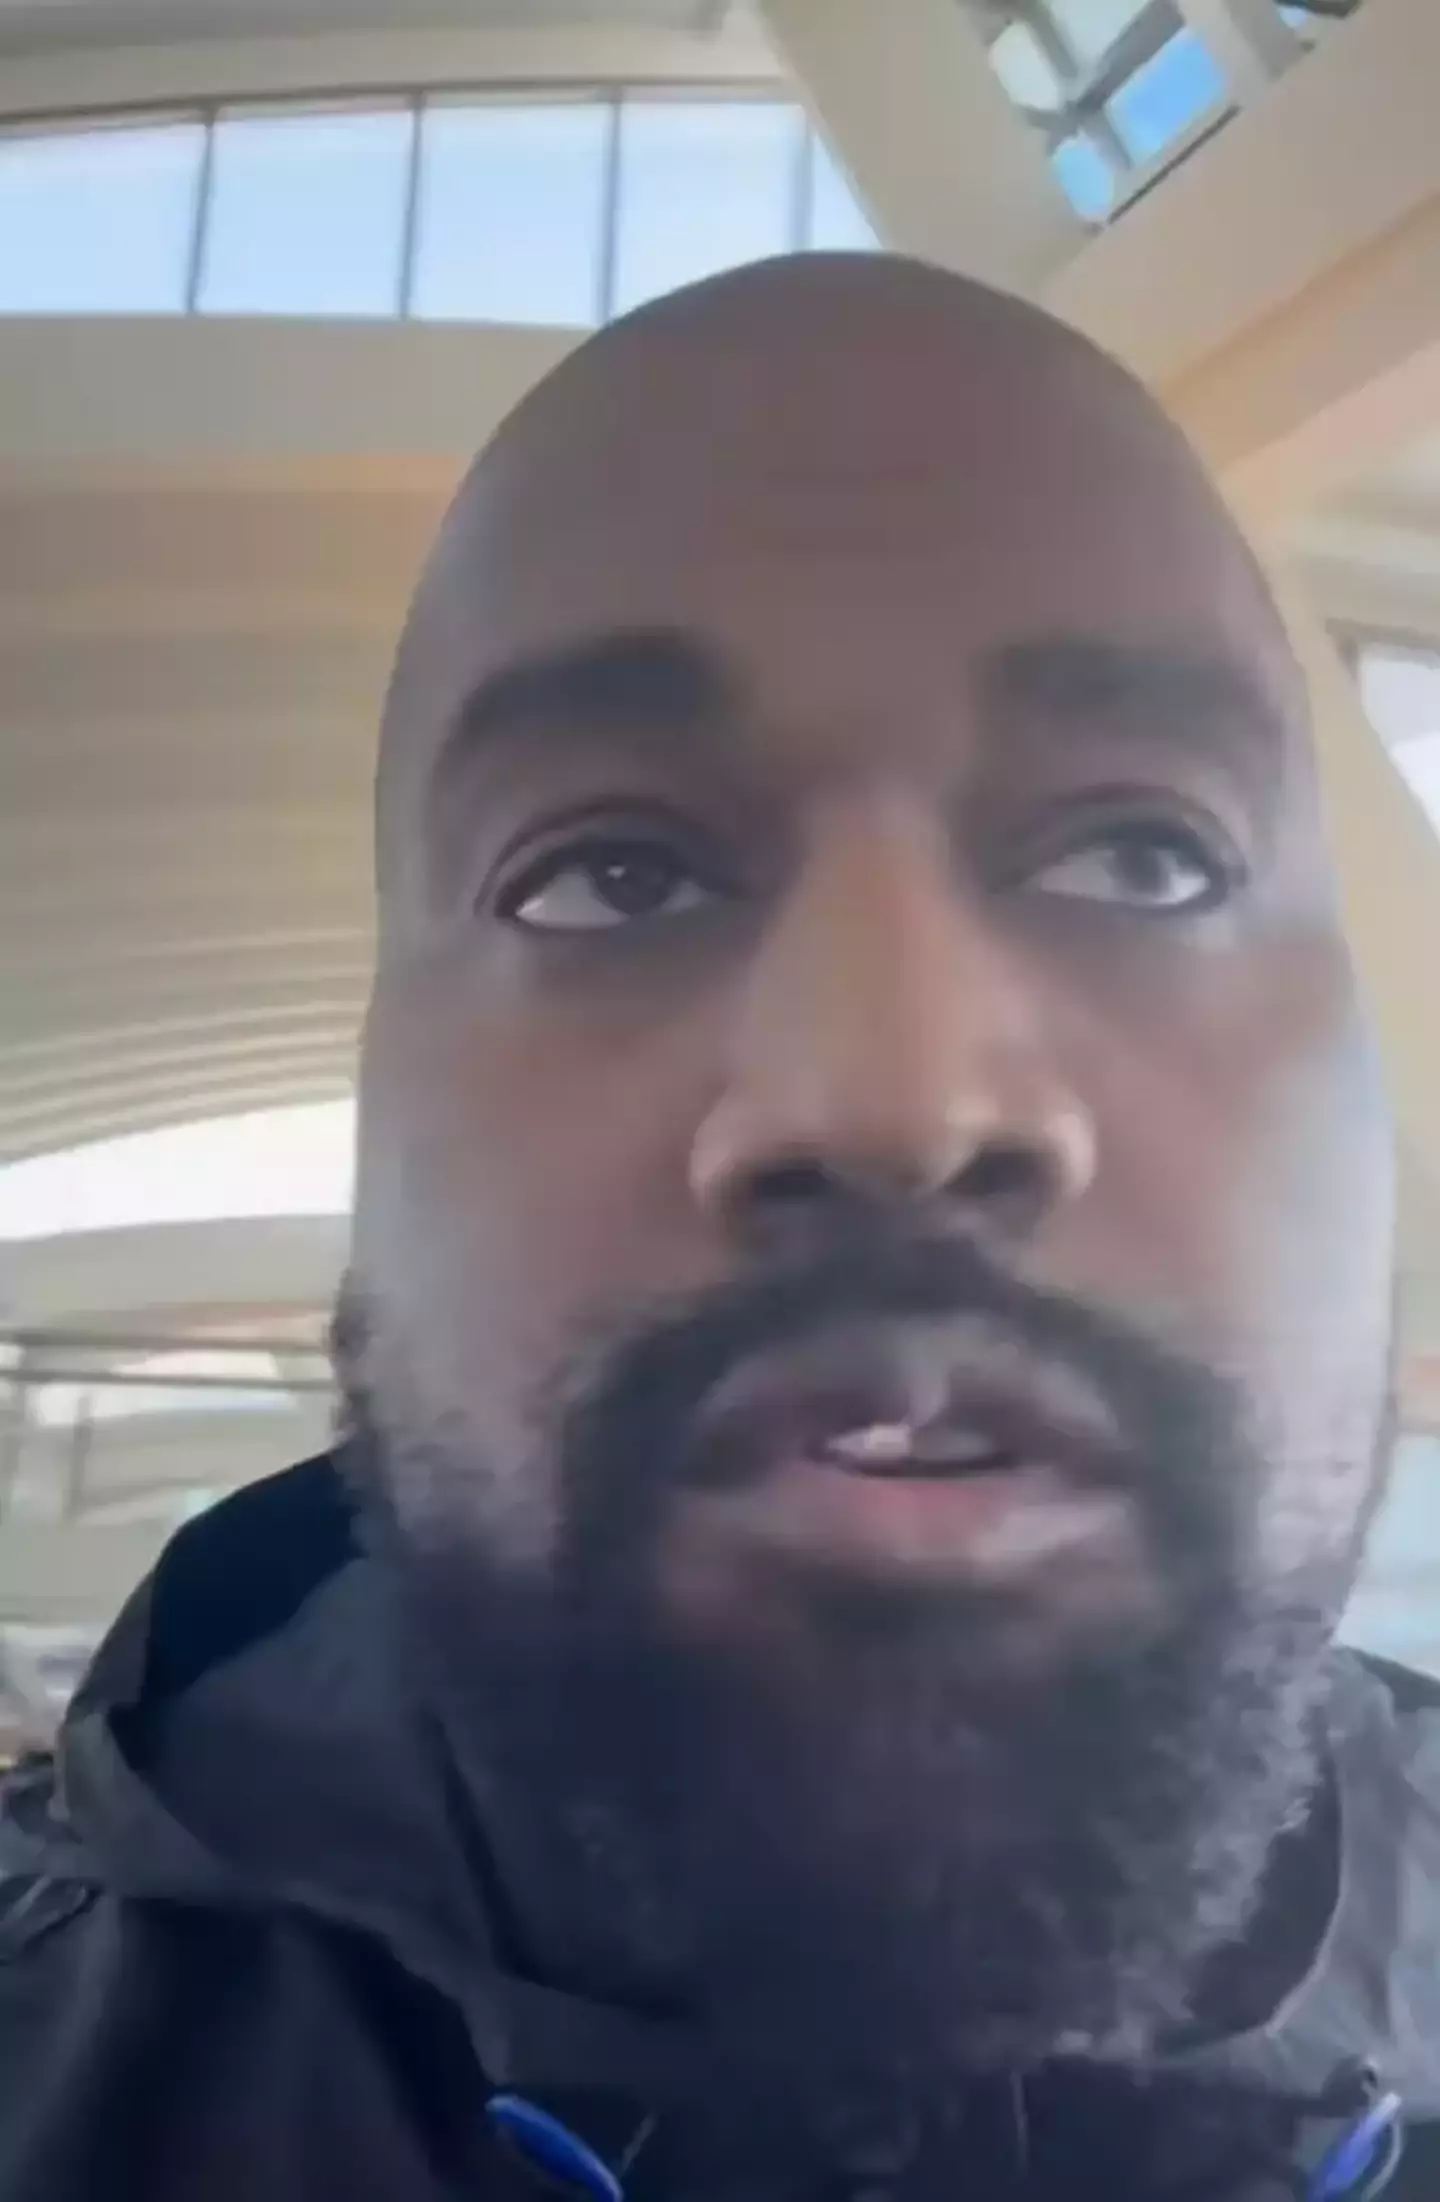 Kanye West took to social media to respond to the criticism.